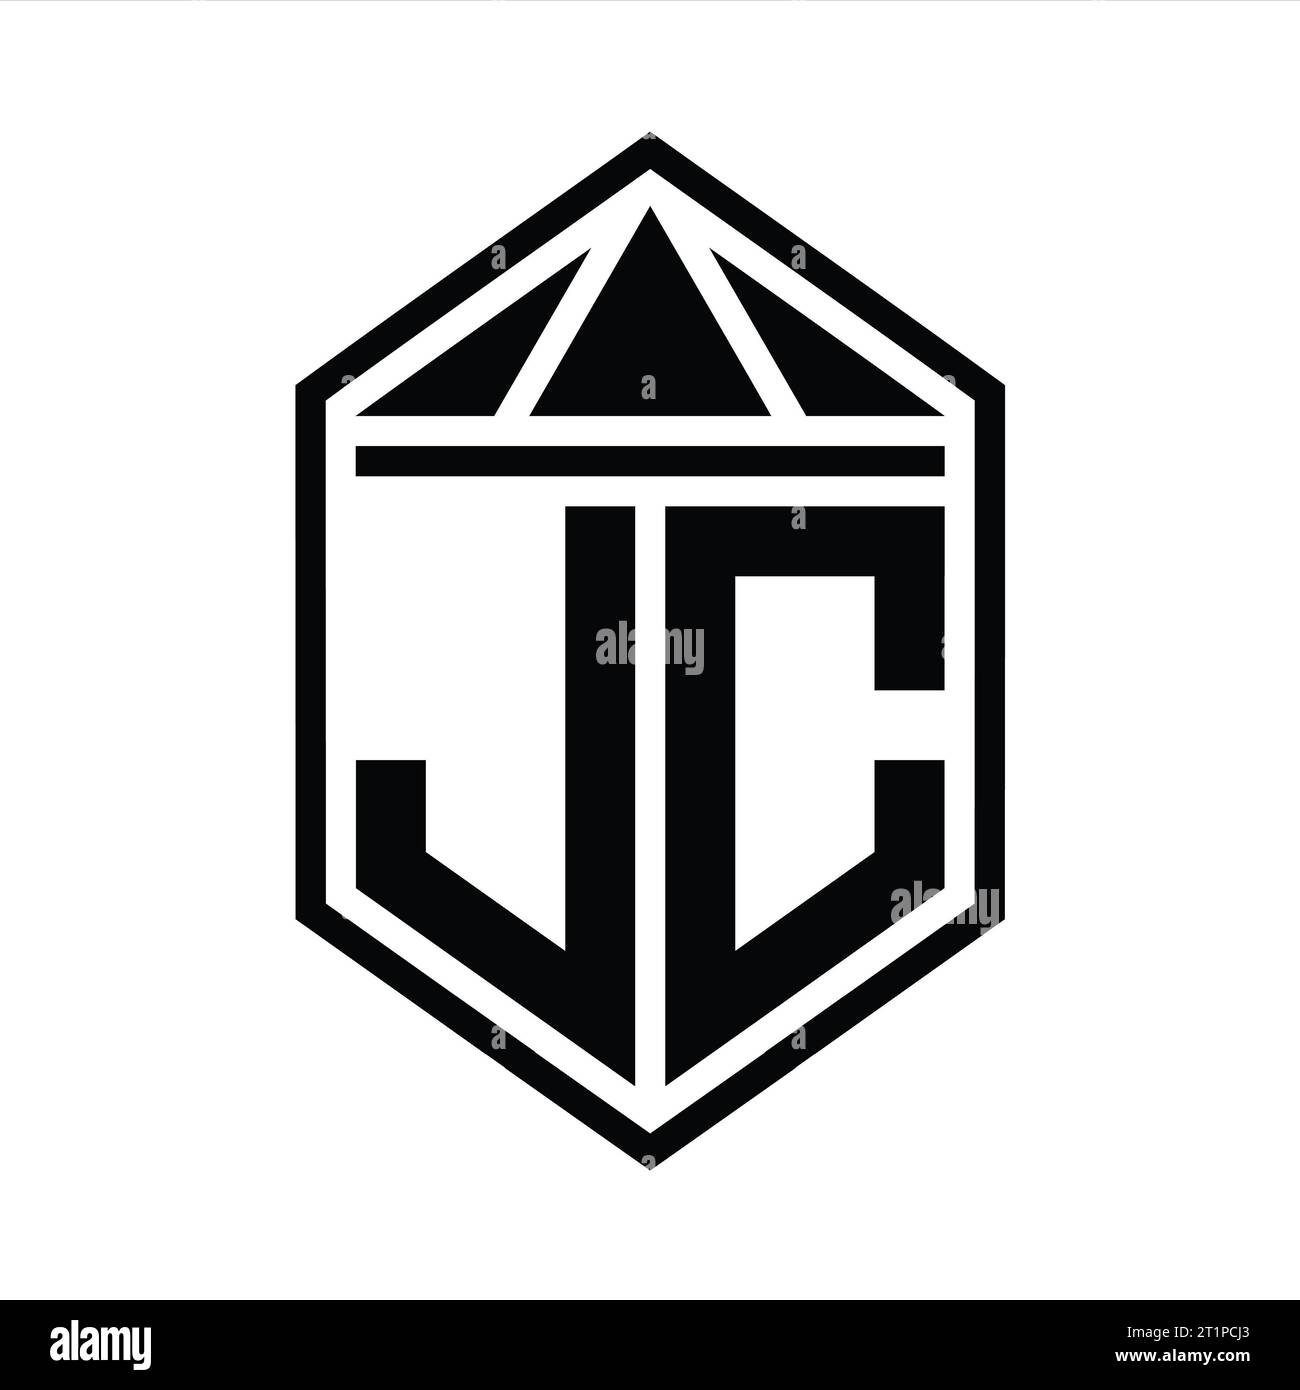 JC Letter Logo monogram simple hexagon shield shape with triangle crown isolated style design template Stock Photo